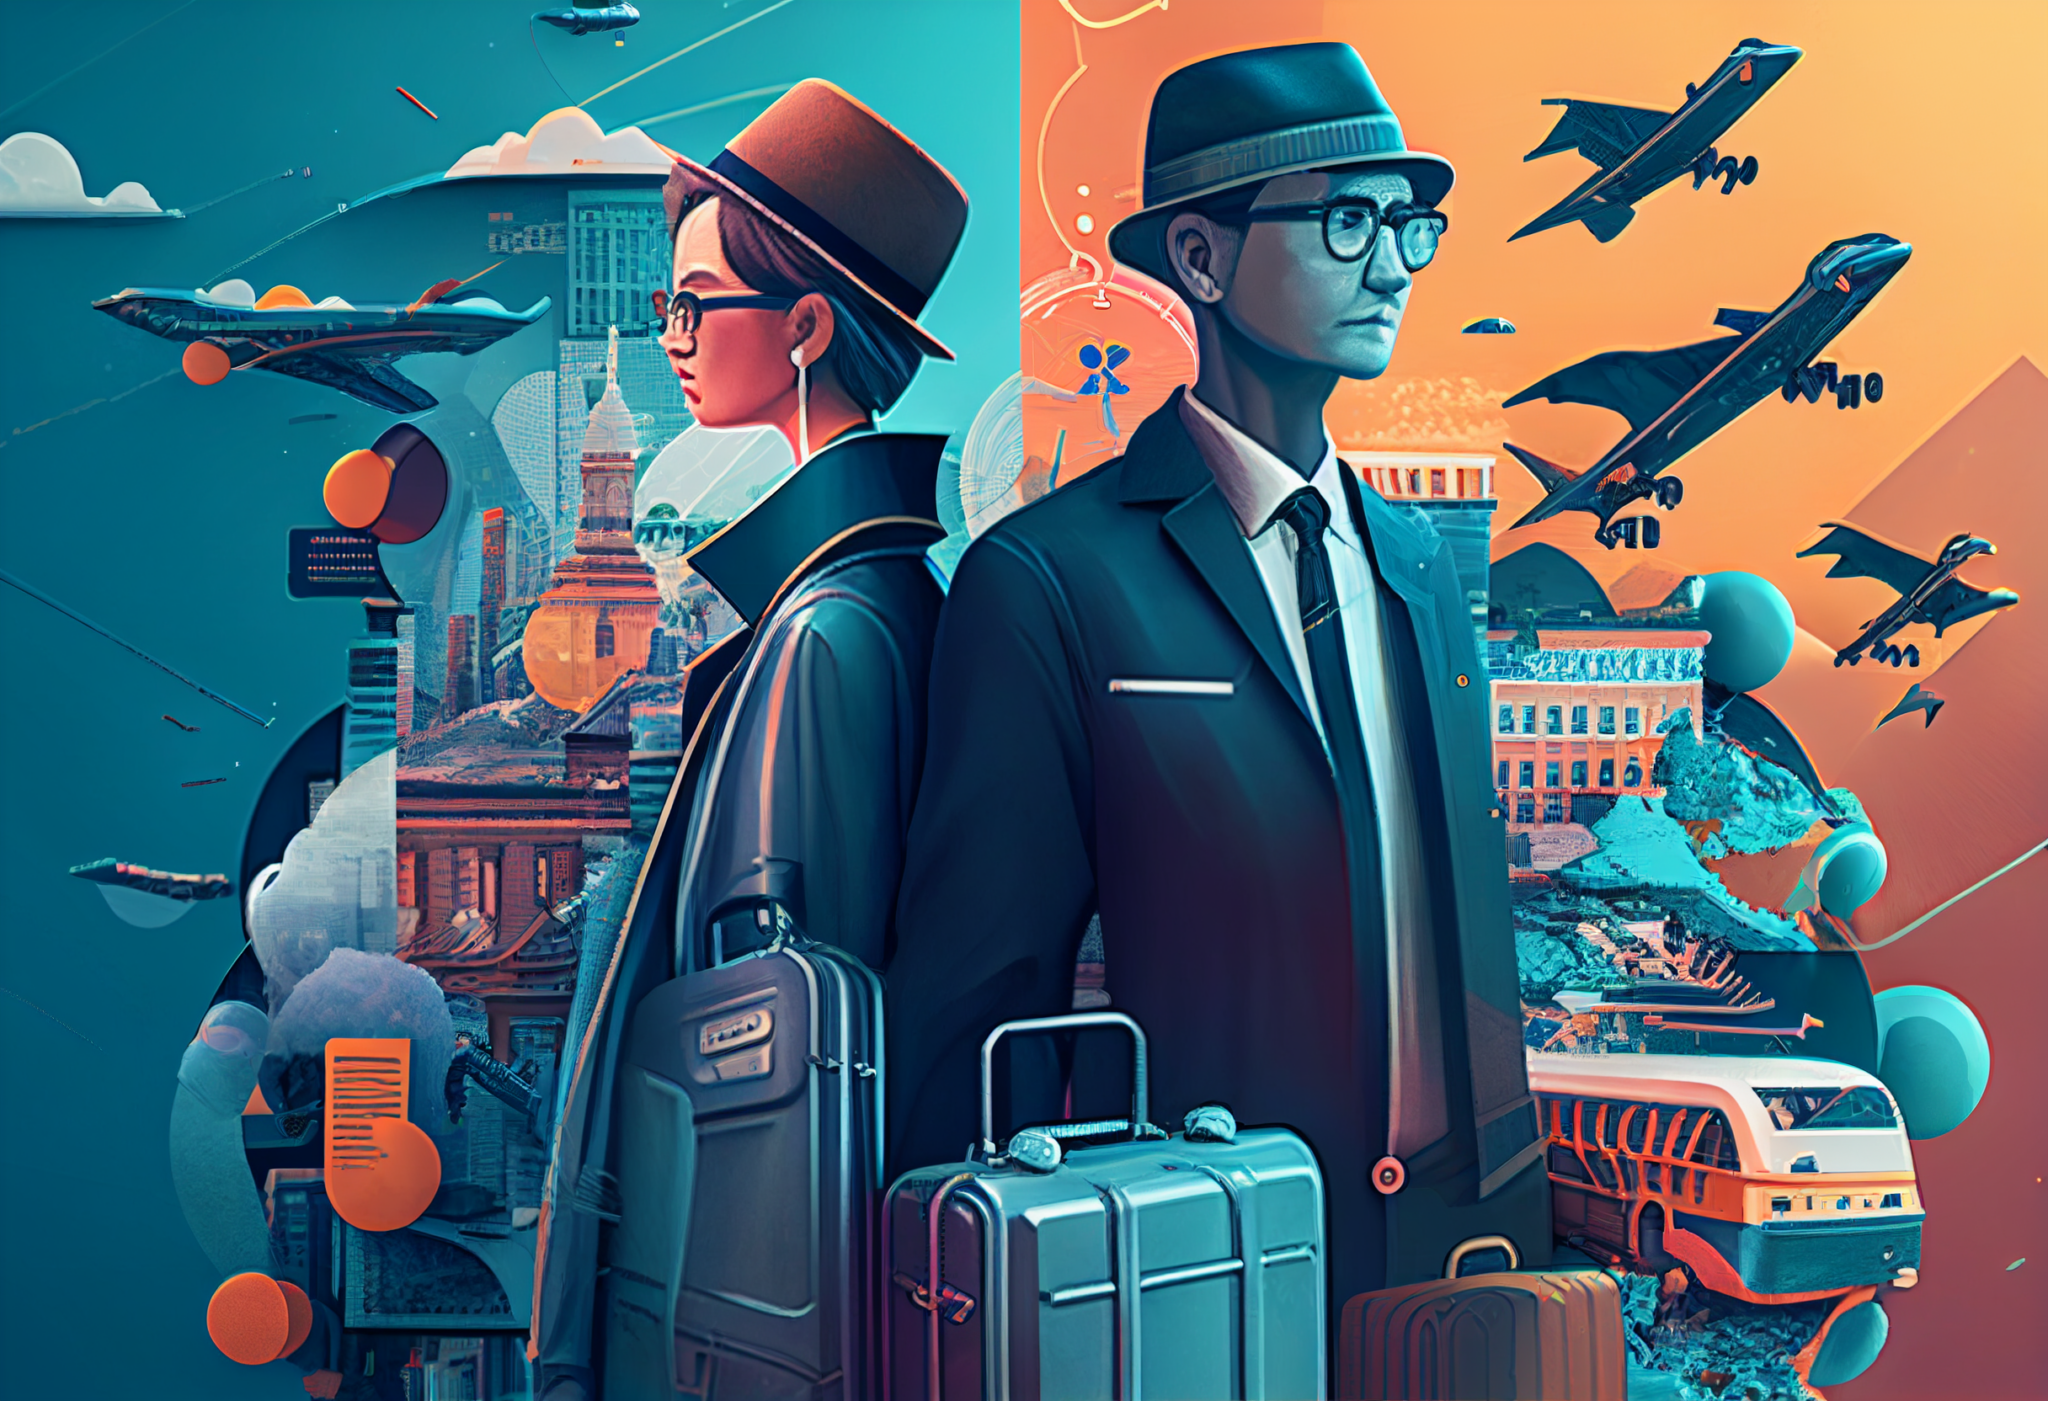 A composite illustration that gathers together the broader concepts of travel and contrasts them with changing technology including artificial intelligence. Source: Midjourney/Skift